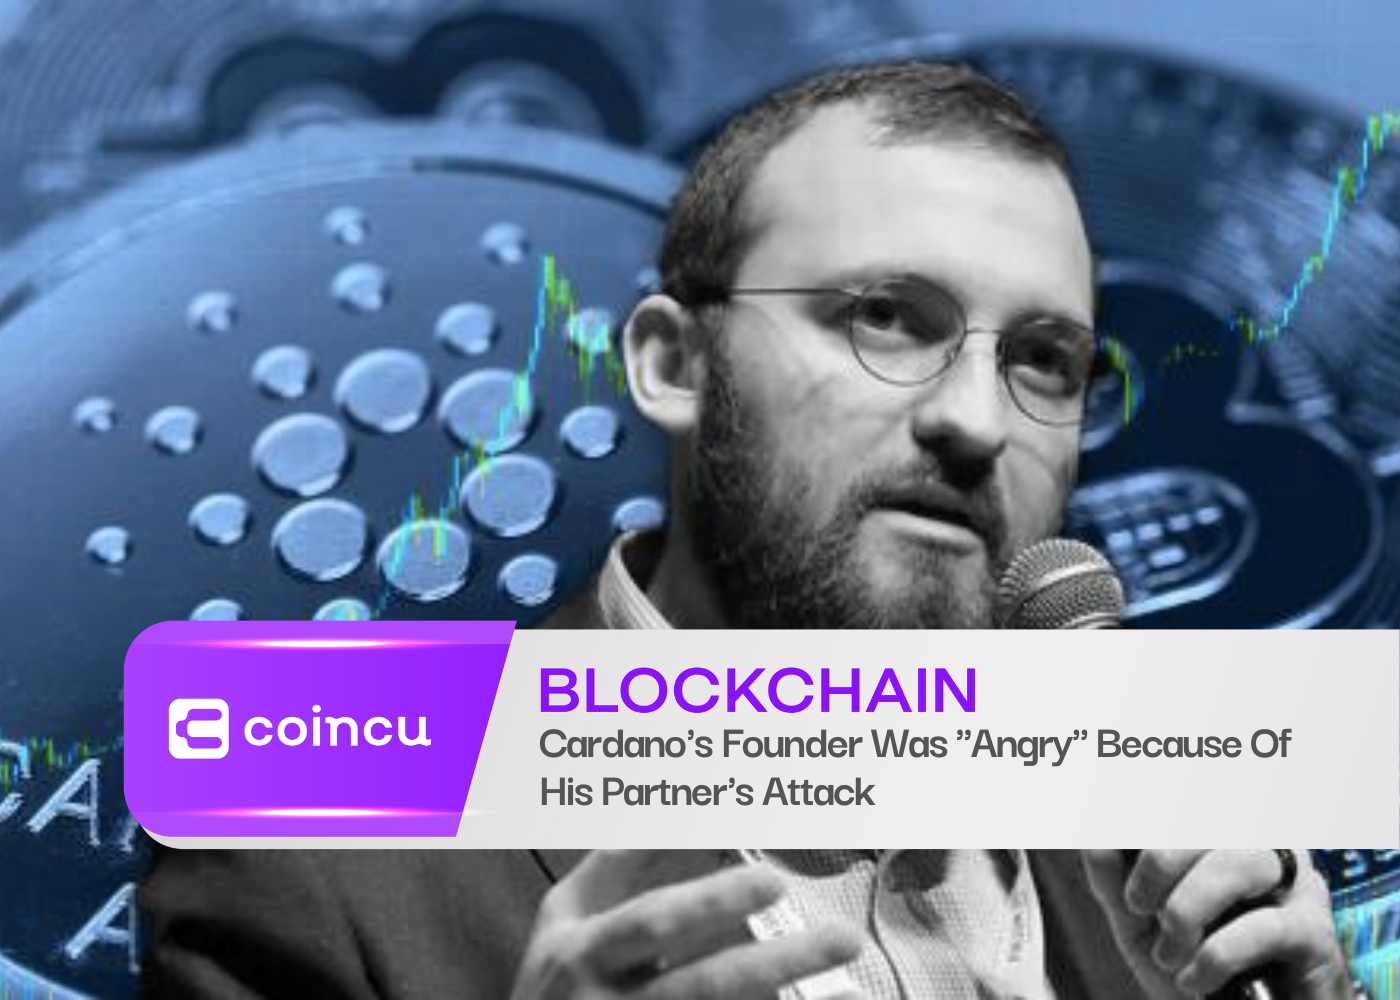 Cardano’s Founder Was “Angry” Because Of His Partner’s Attack